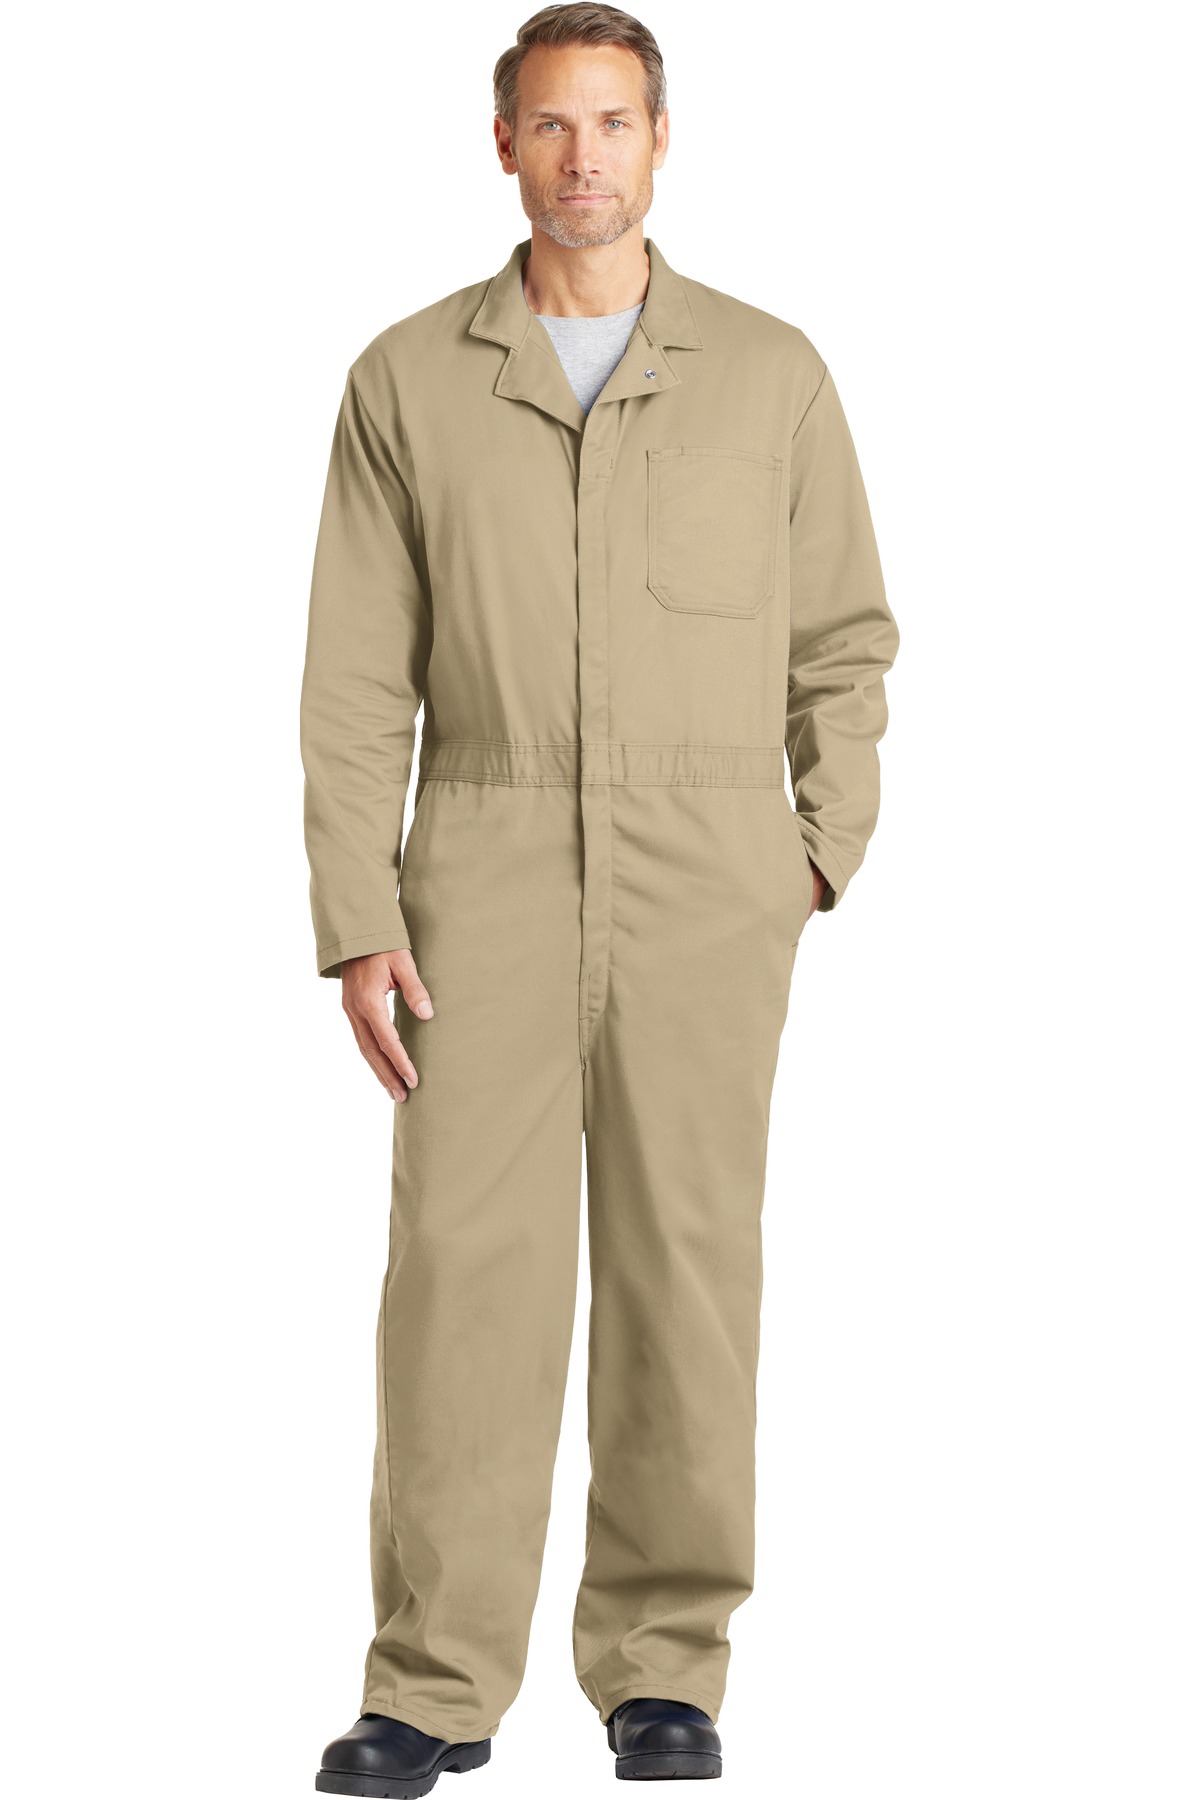 Bulwark  EXCEL FR  CEC2 - Classic Coverall